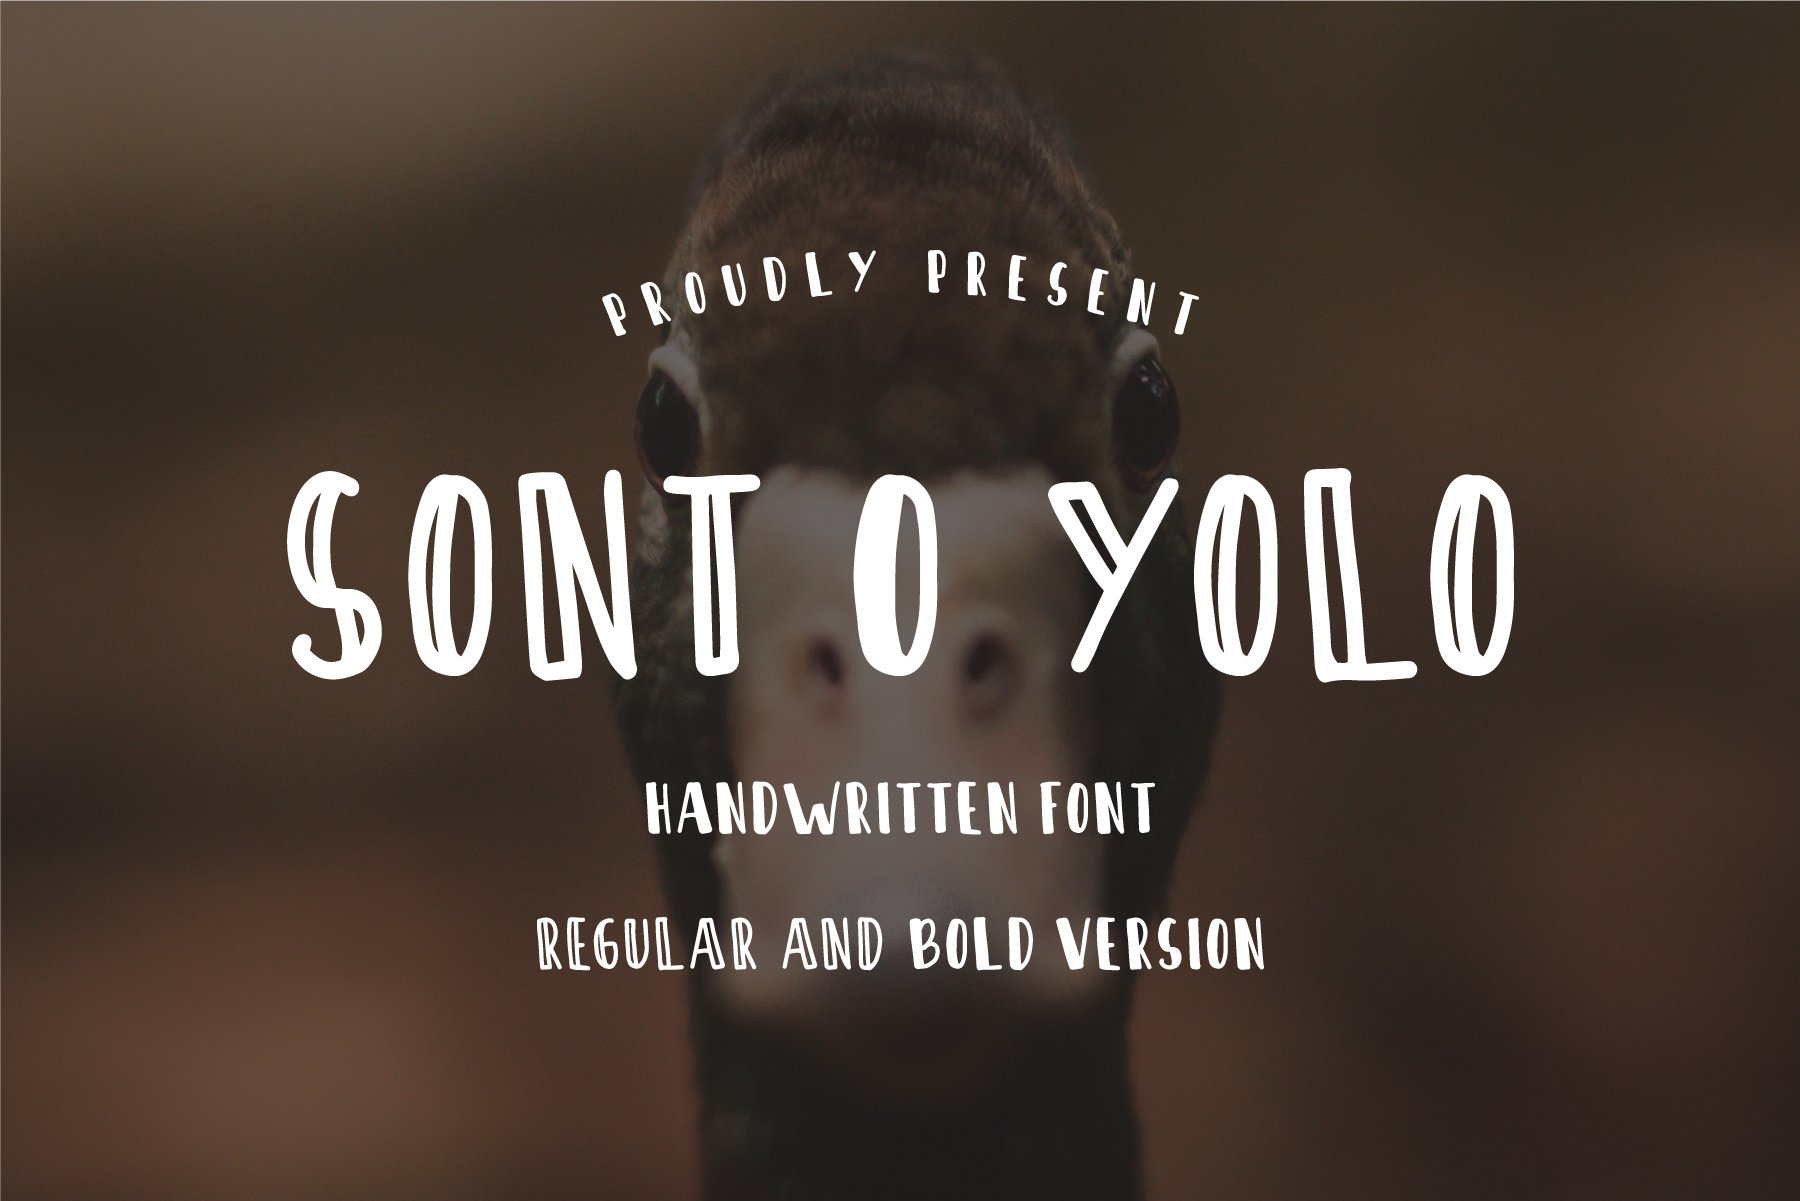 Sont O Yolo - Handwritten Font cover image.